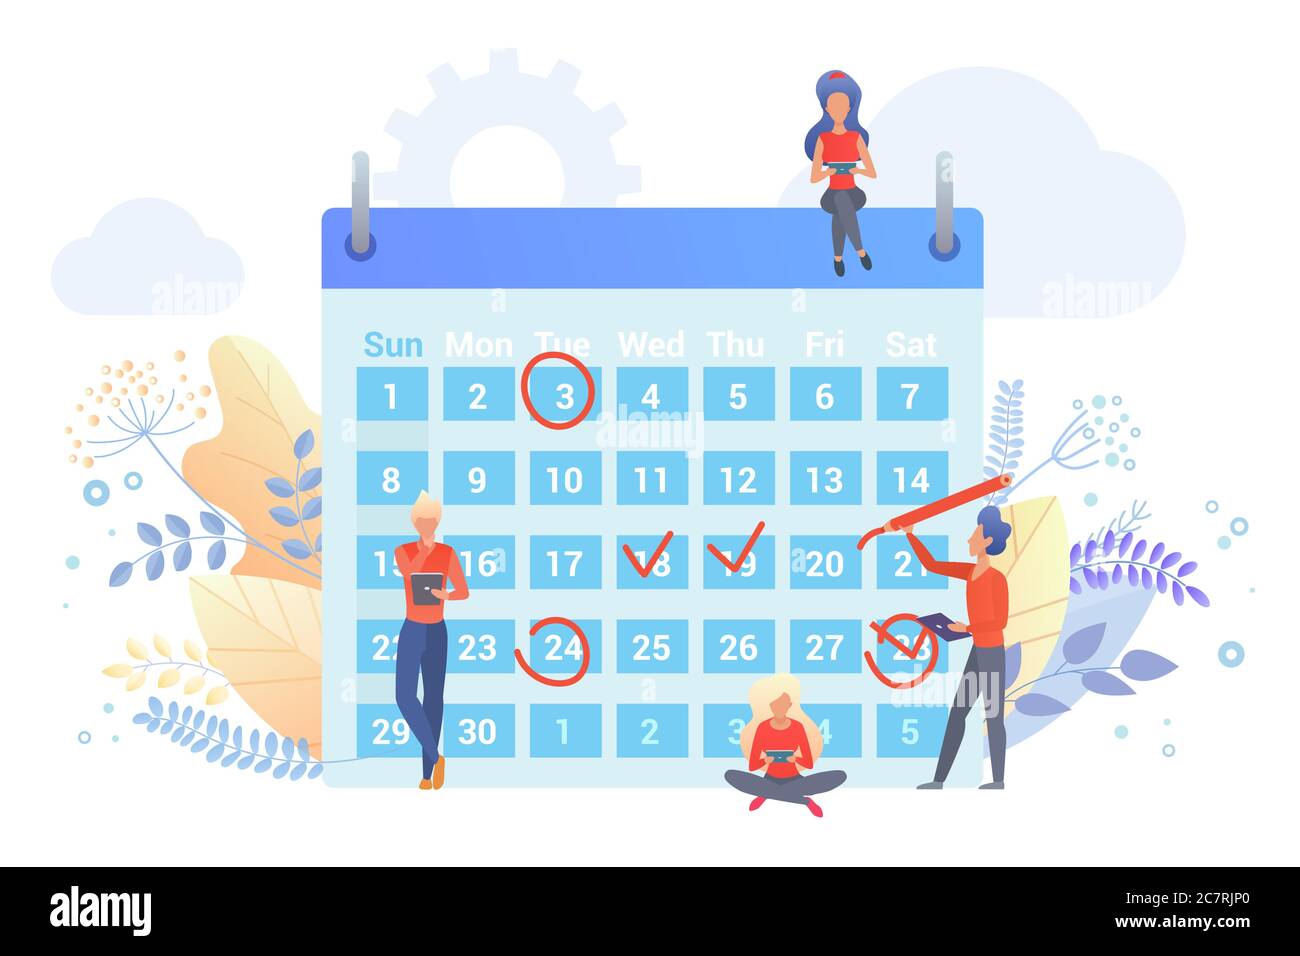 Workers planning time with calendar flat vector illustration. People marking dates with red circle, check signs cartoon characters. Time management metaphor. Scheduling agenda, company events. Stock Vector